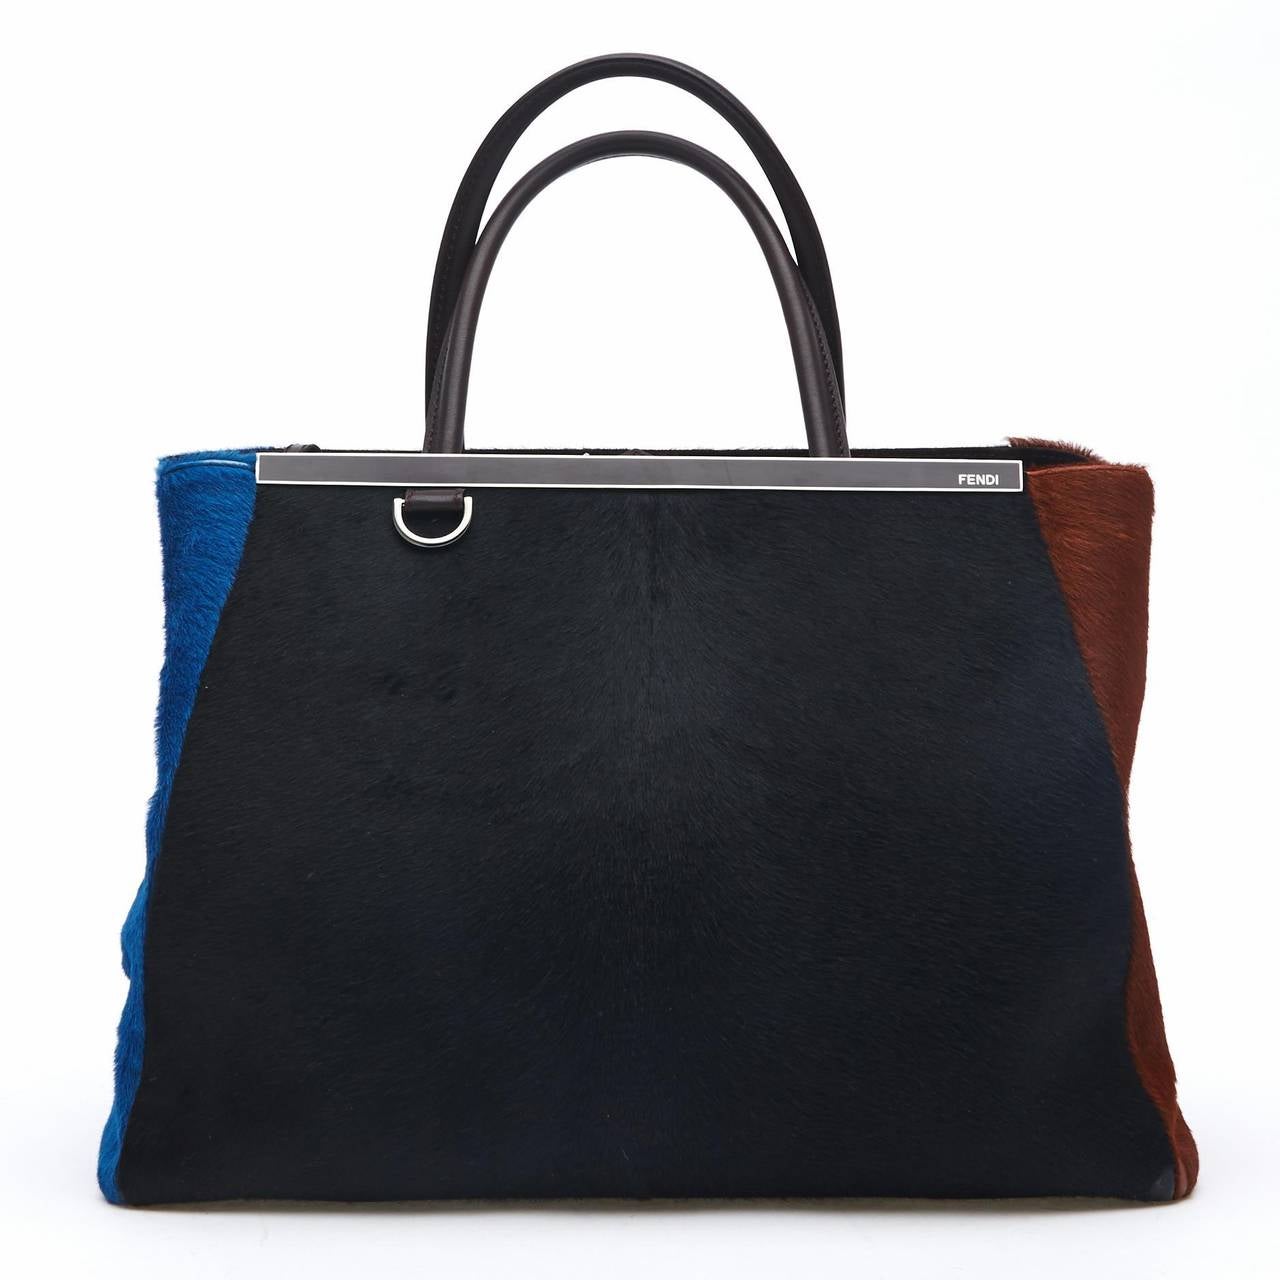 This tasteful Fendi Calf Hair 2Jours in Medium features a unique color block design of black, brown, and blue, and is perfect for the fall and winter. It is accented with a shining top bar that dons the Fendi brand name. It features a removable long